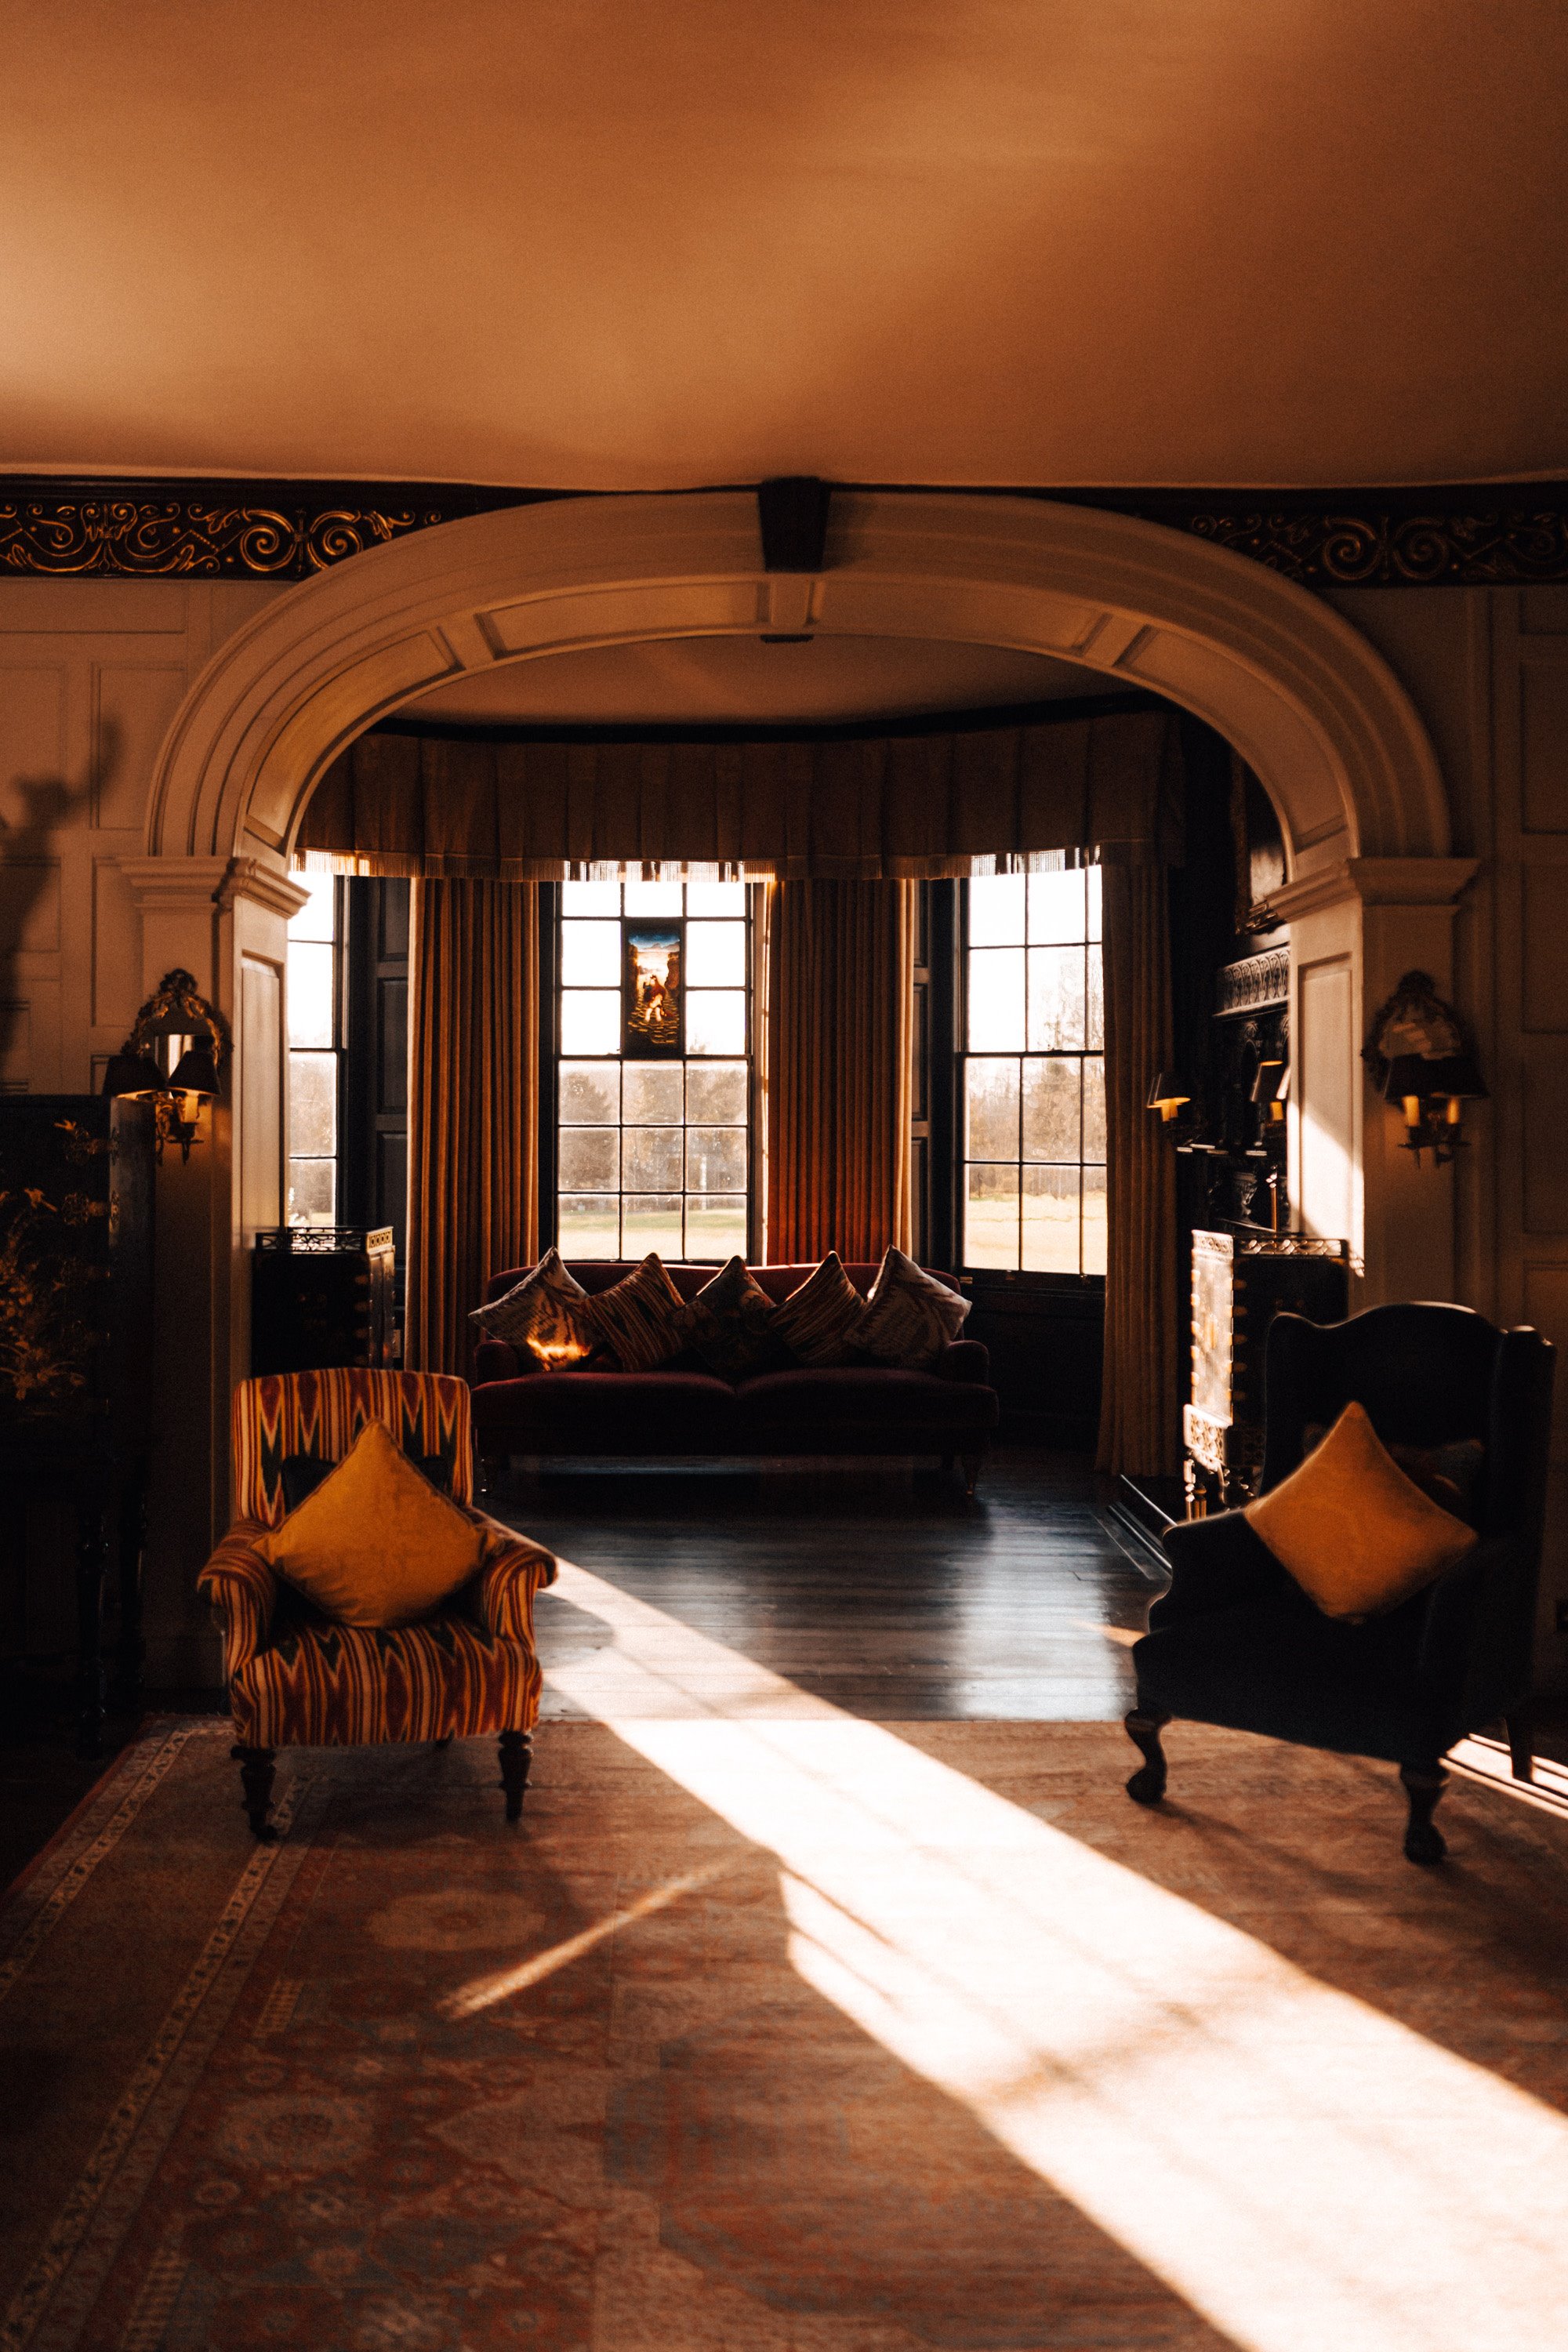 cosy drawing room in an old mansion house wedding venue with winter sun streaming in the windows